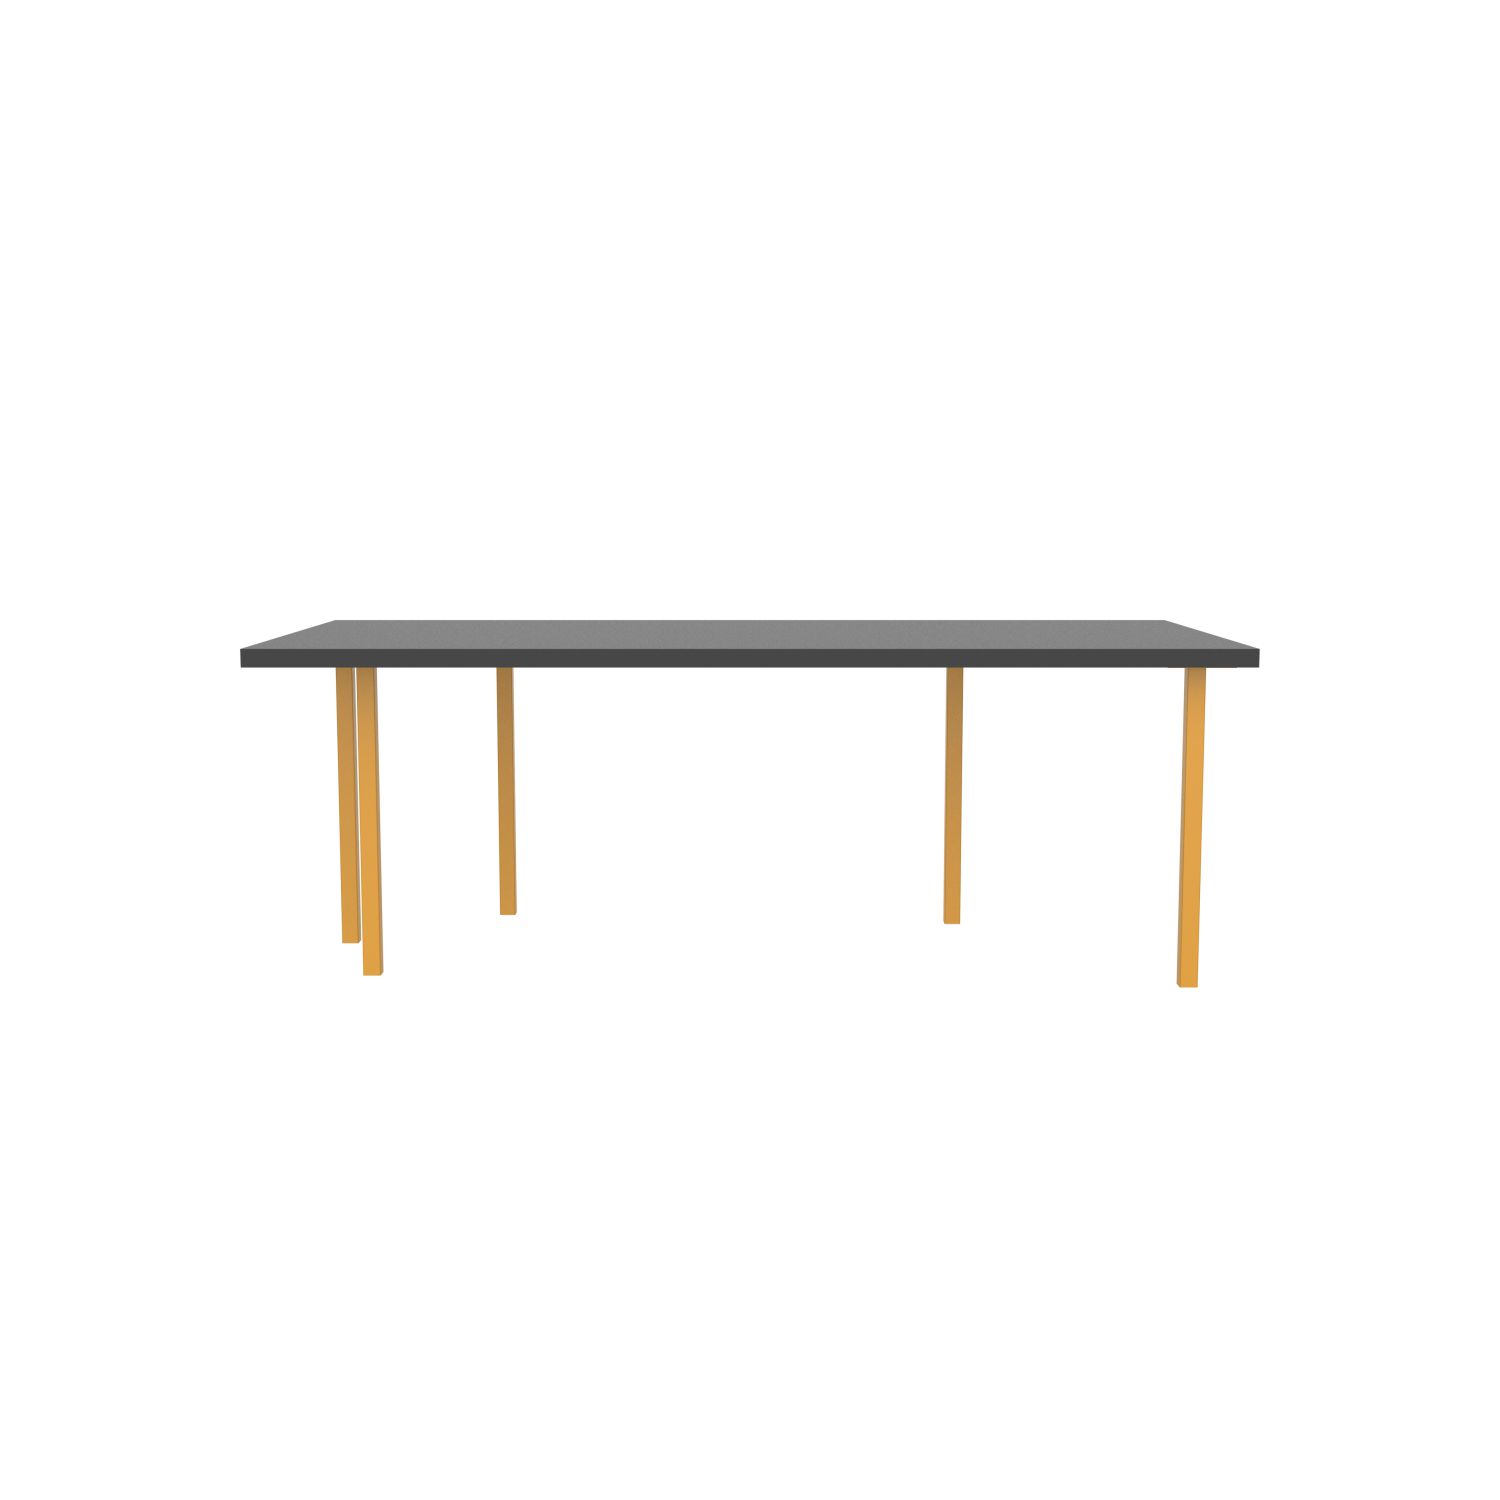 lensvelt bbrand table five fixed heigt 103x218 hpl black 50 mm price level 1 yellow ral1004